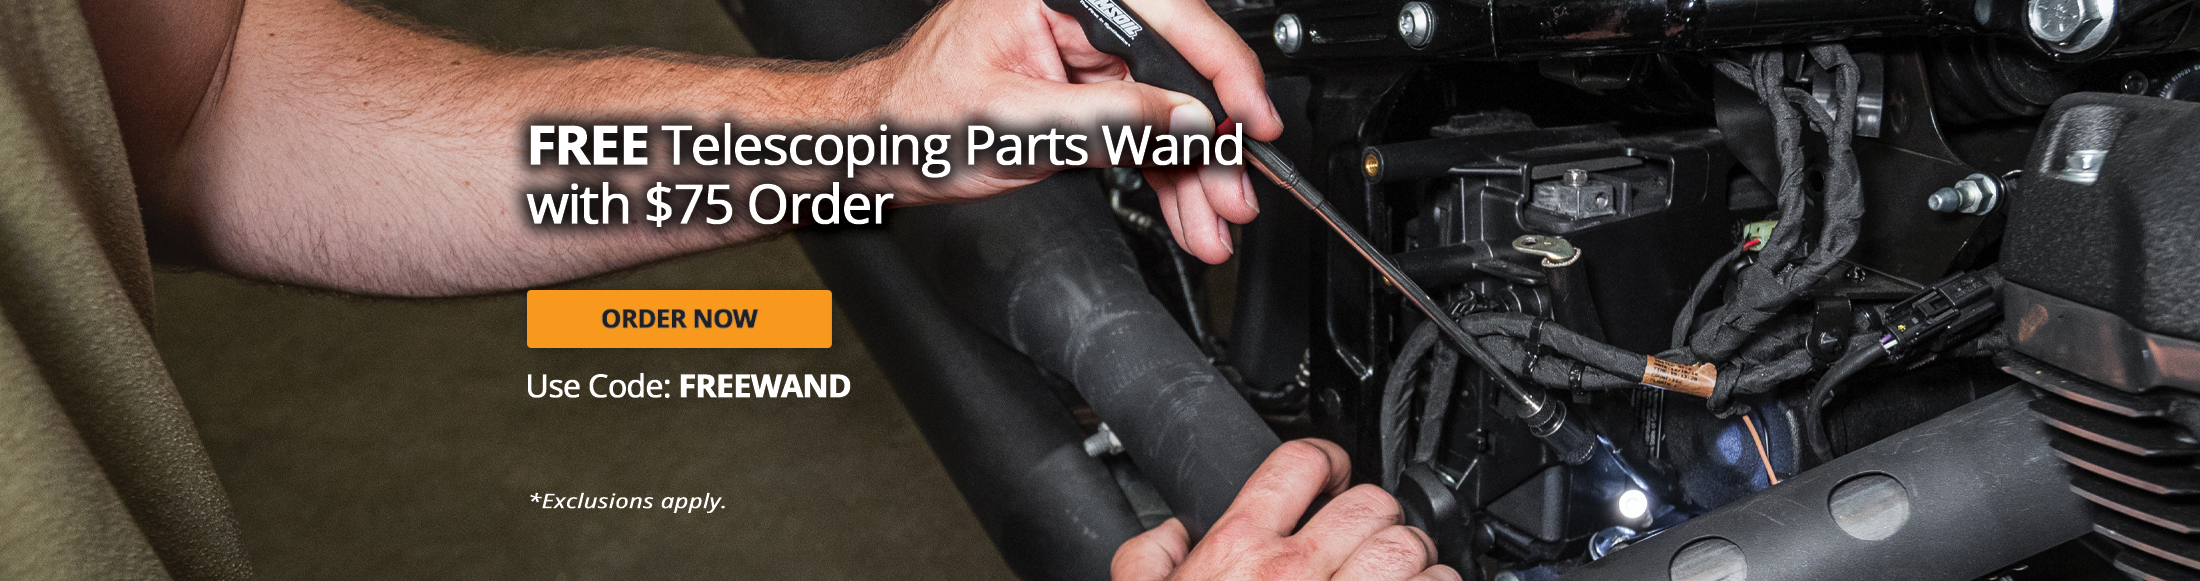 FREE Telescoping Parts Want with $75 Order. Order Now and use code: FREEWAND. *Exclusions apply.